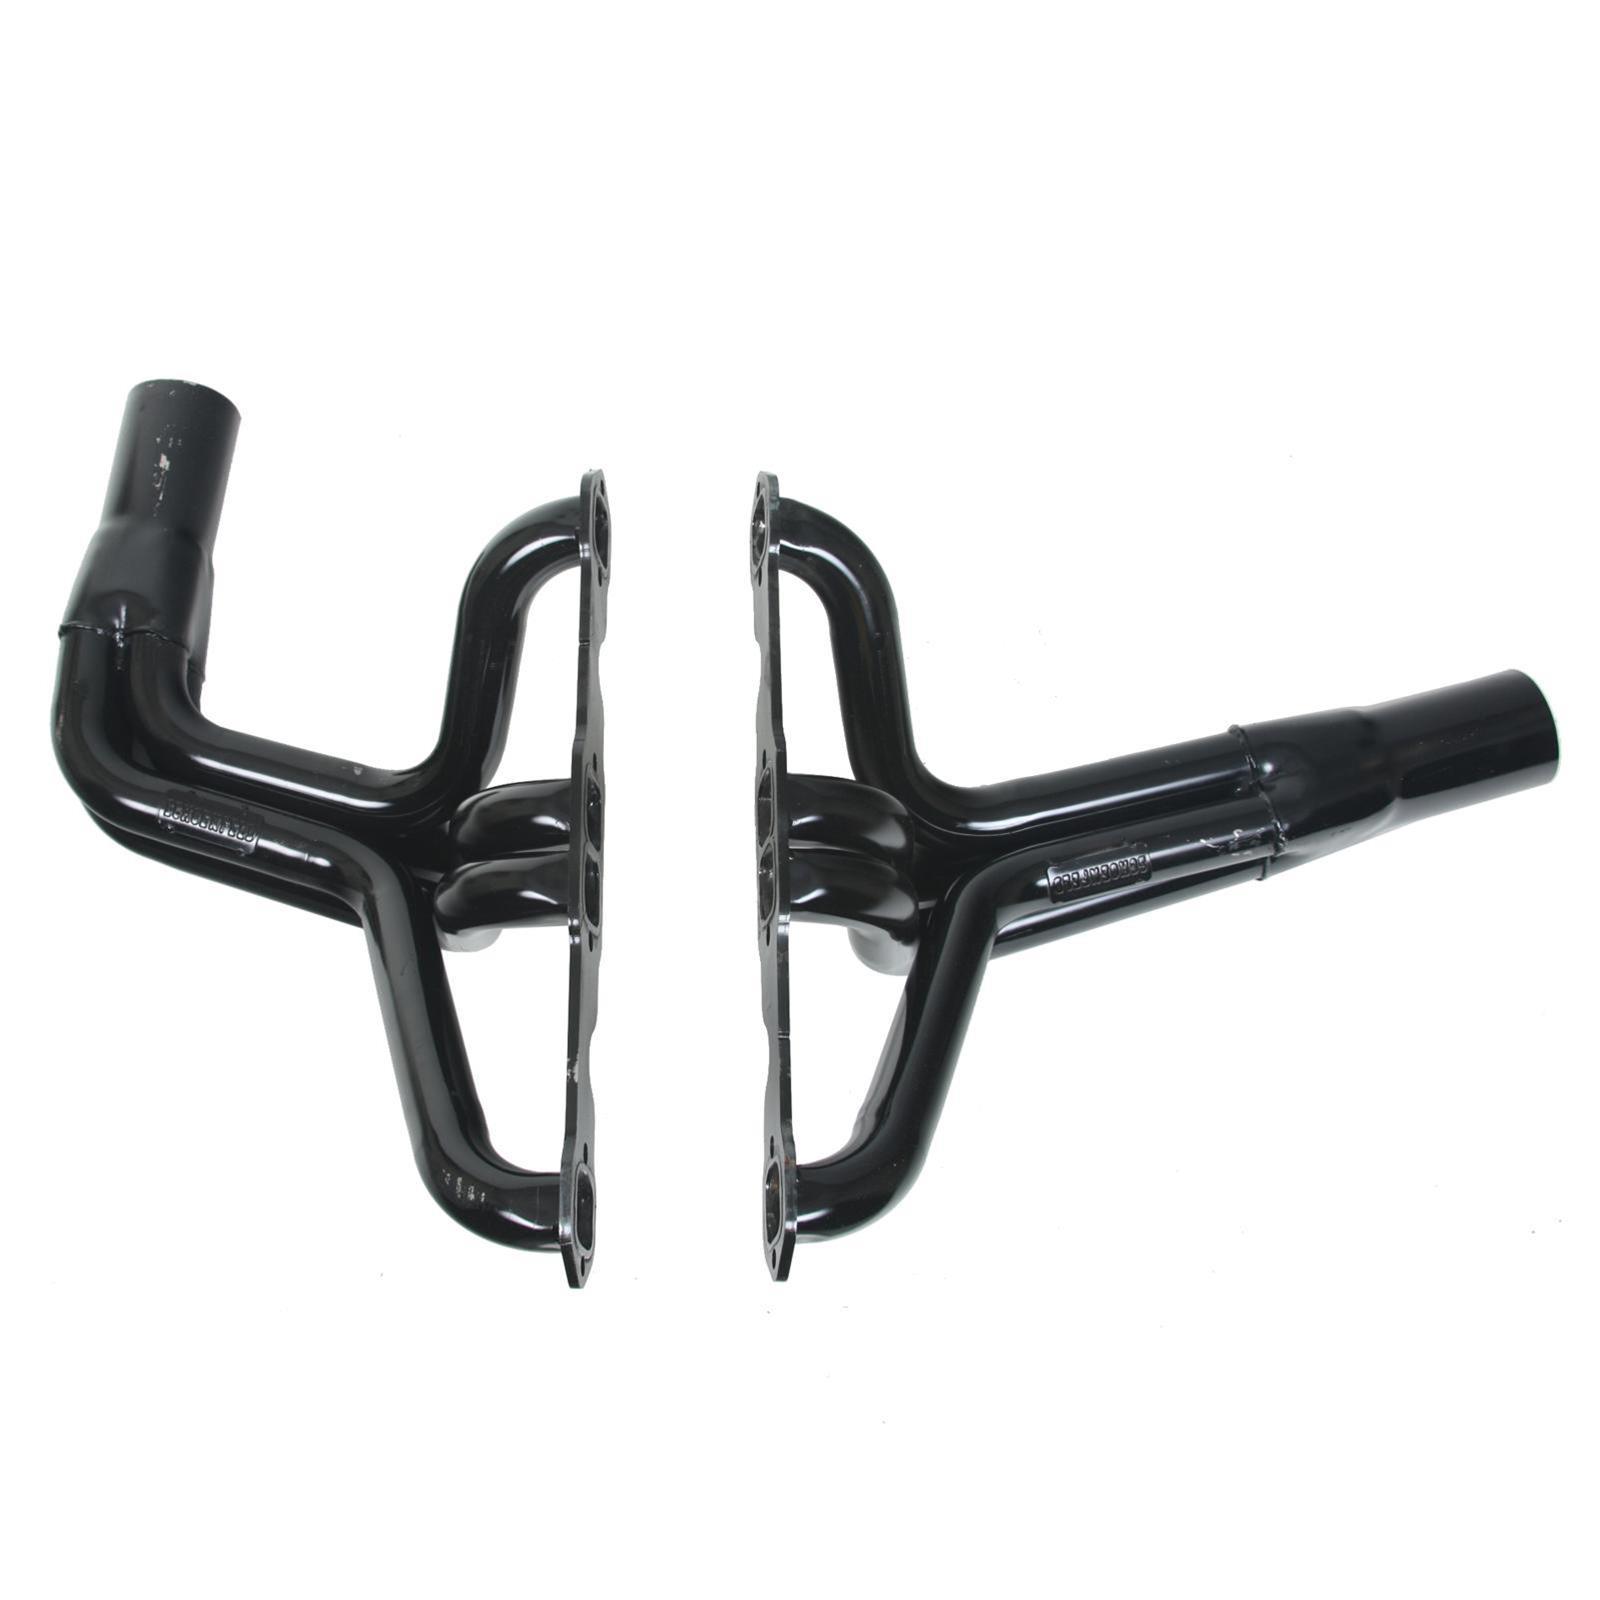 Schoenfeld Headers 1155LB Headers, Long Tube, 1-5/8 in Primary, 3 in Collector, Steel, Black Paint, Small Block Chevy, Pair